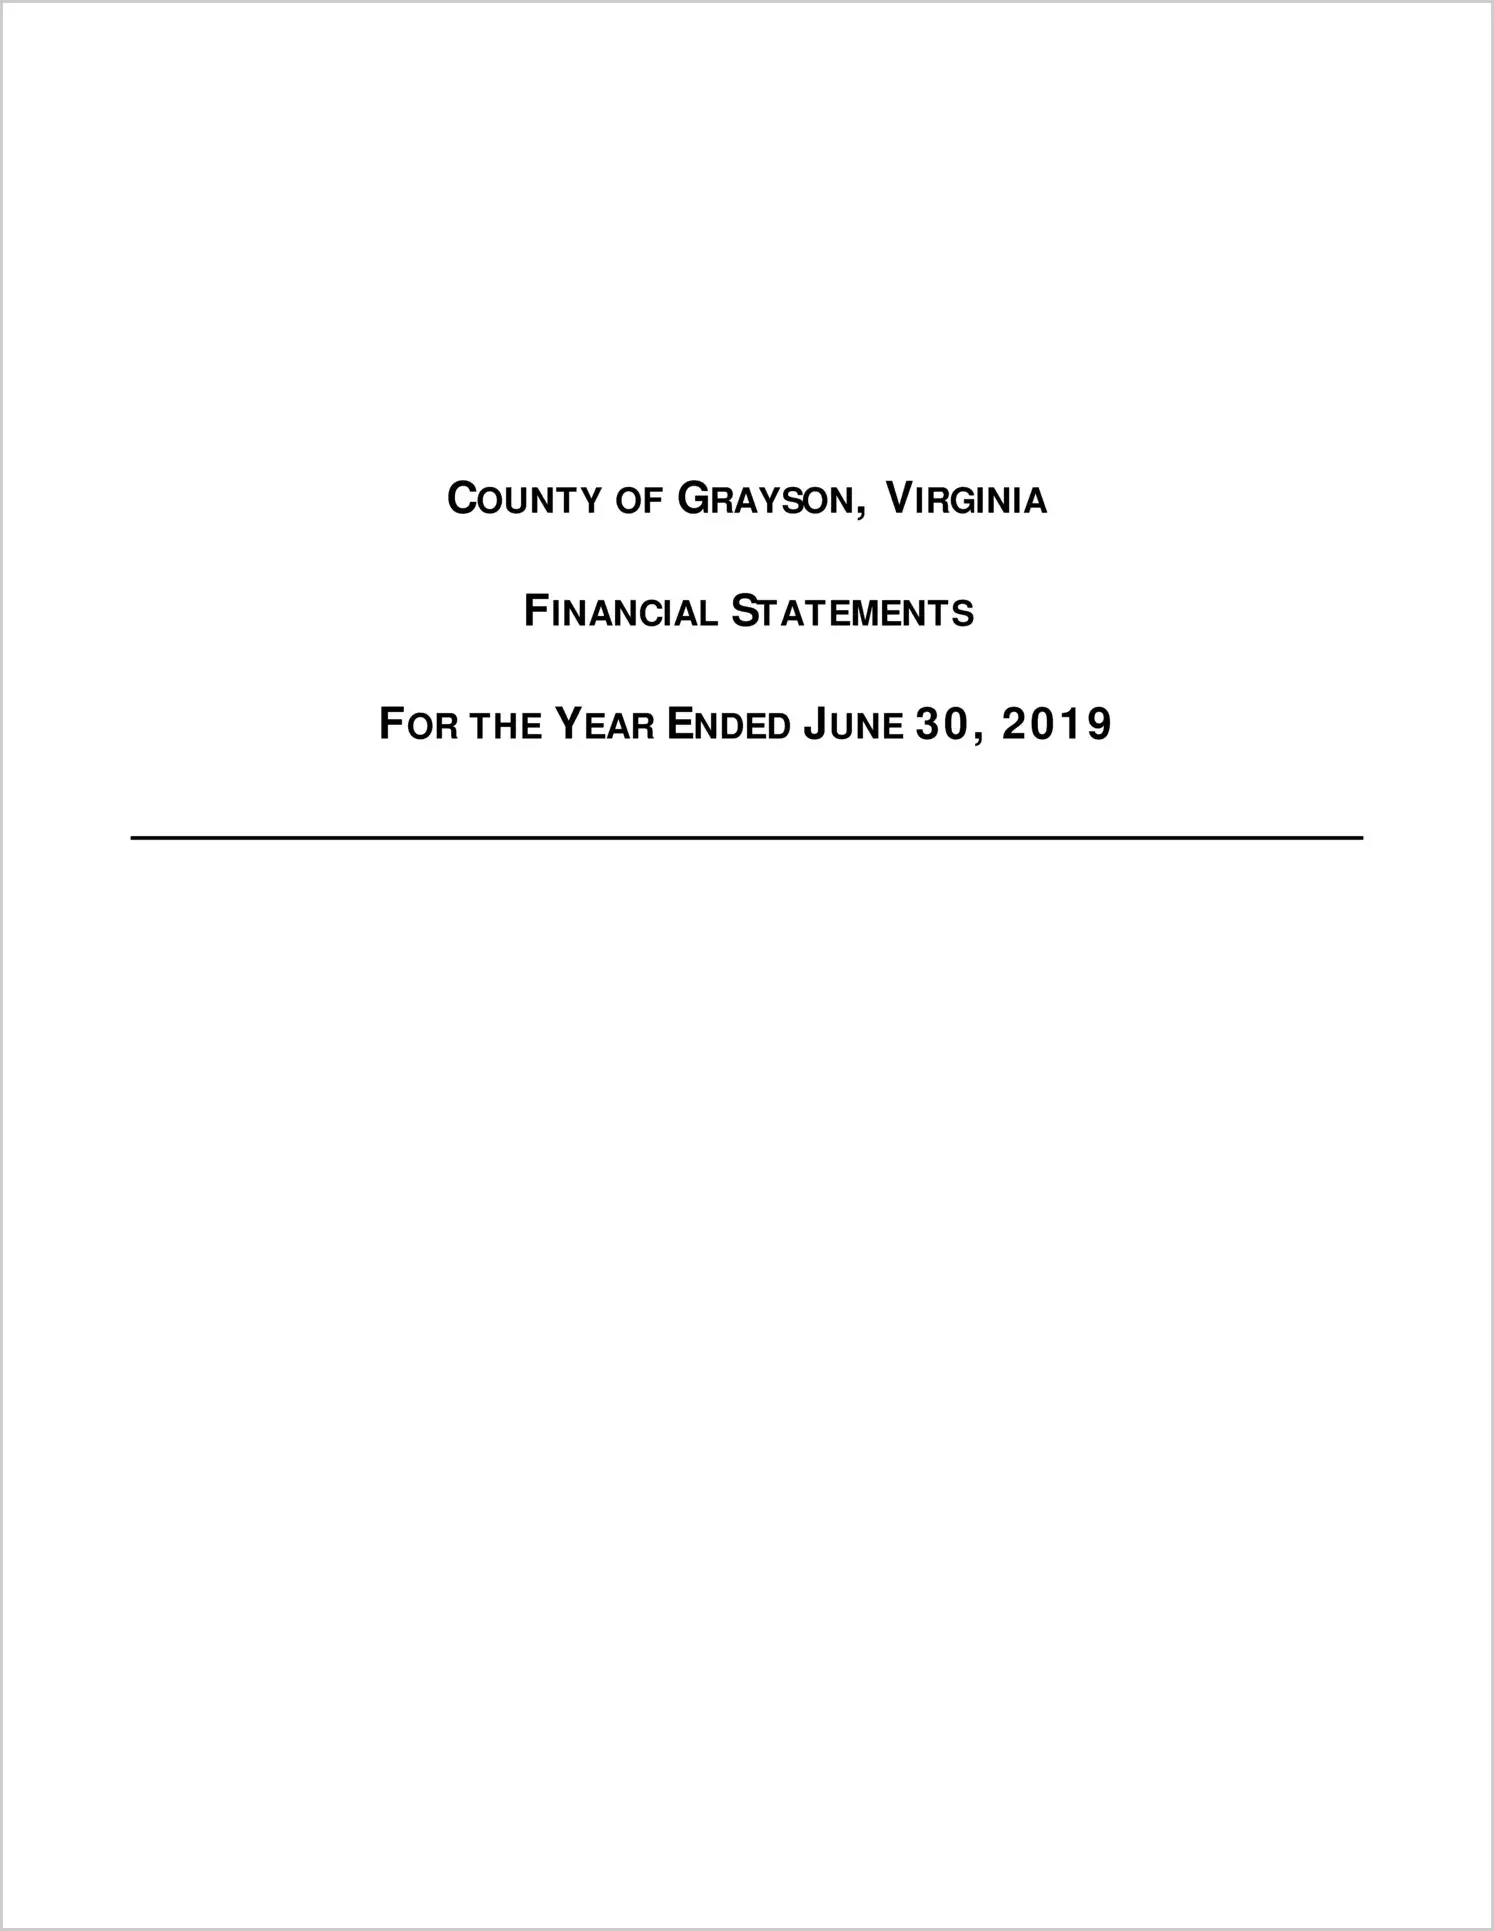 2019 Annual Financial Report for County of Grayson